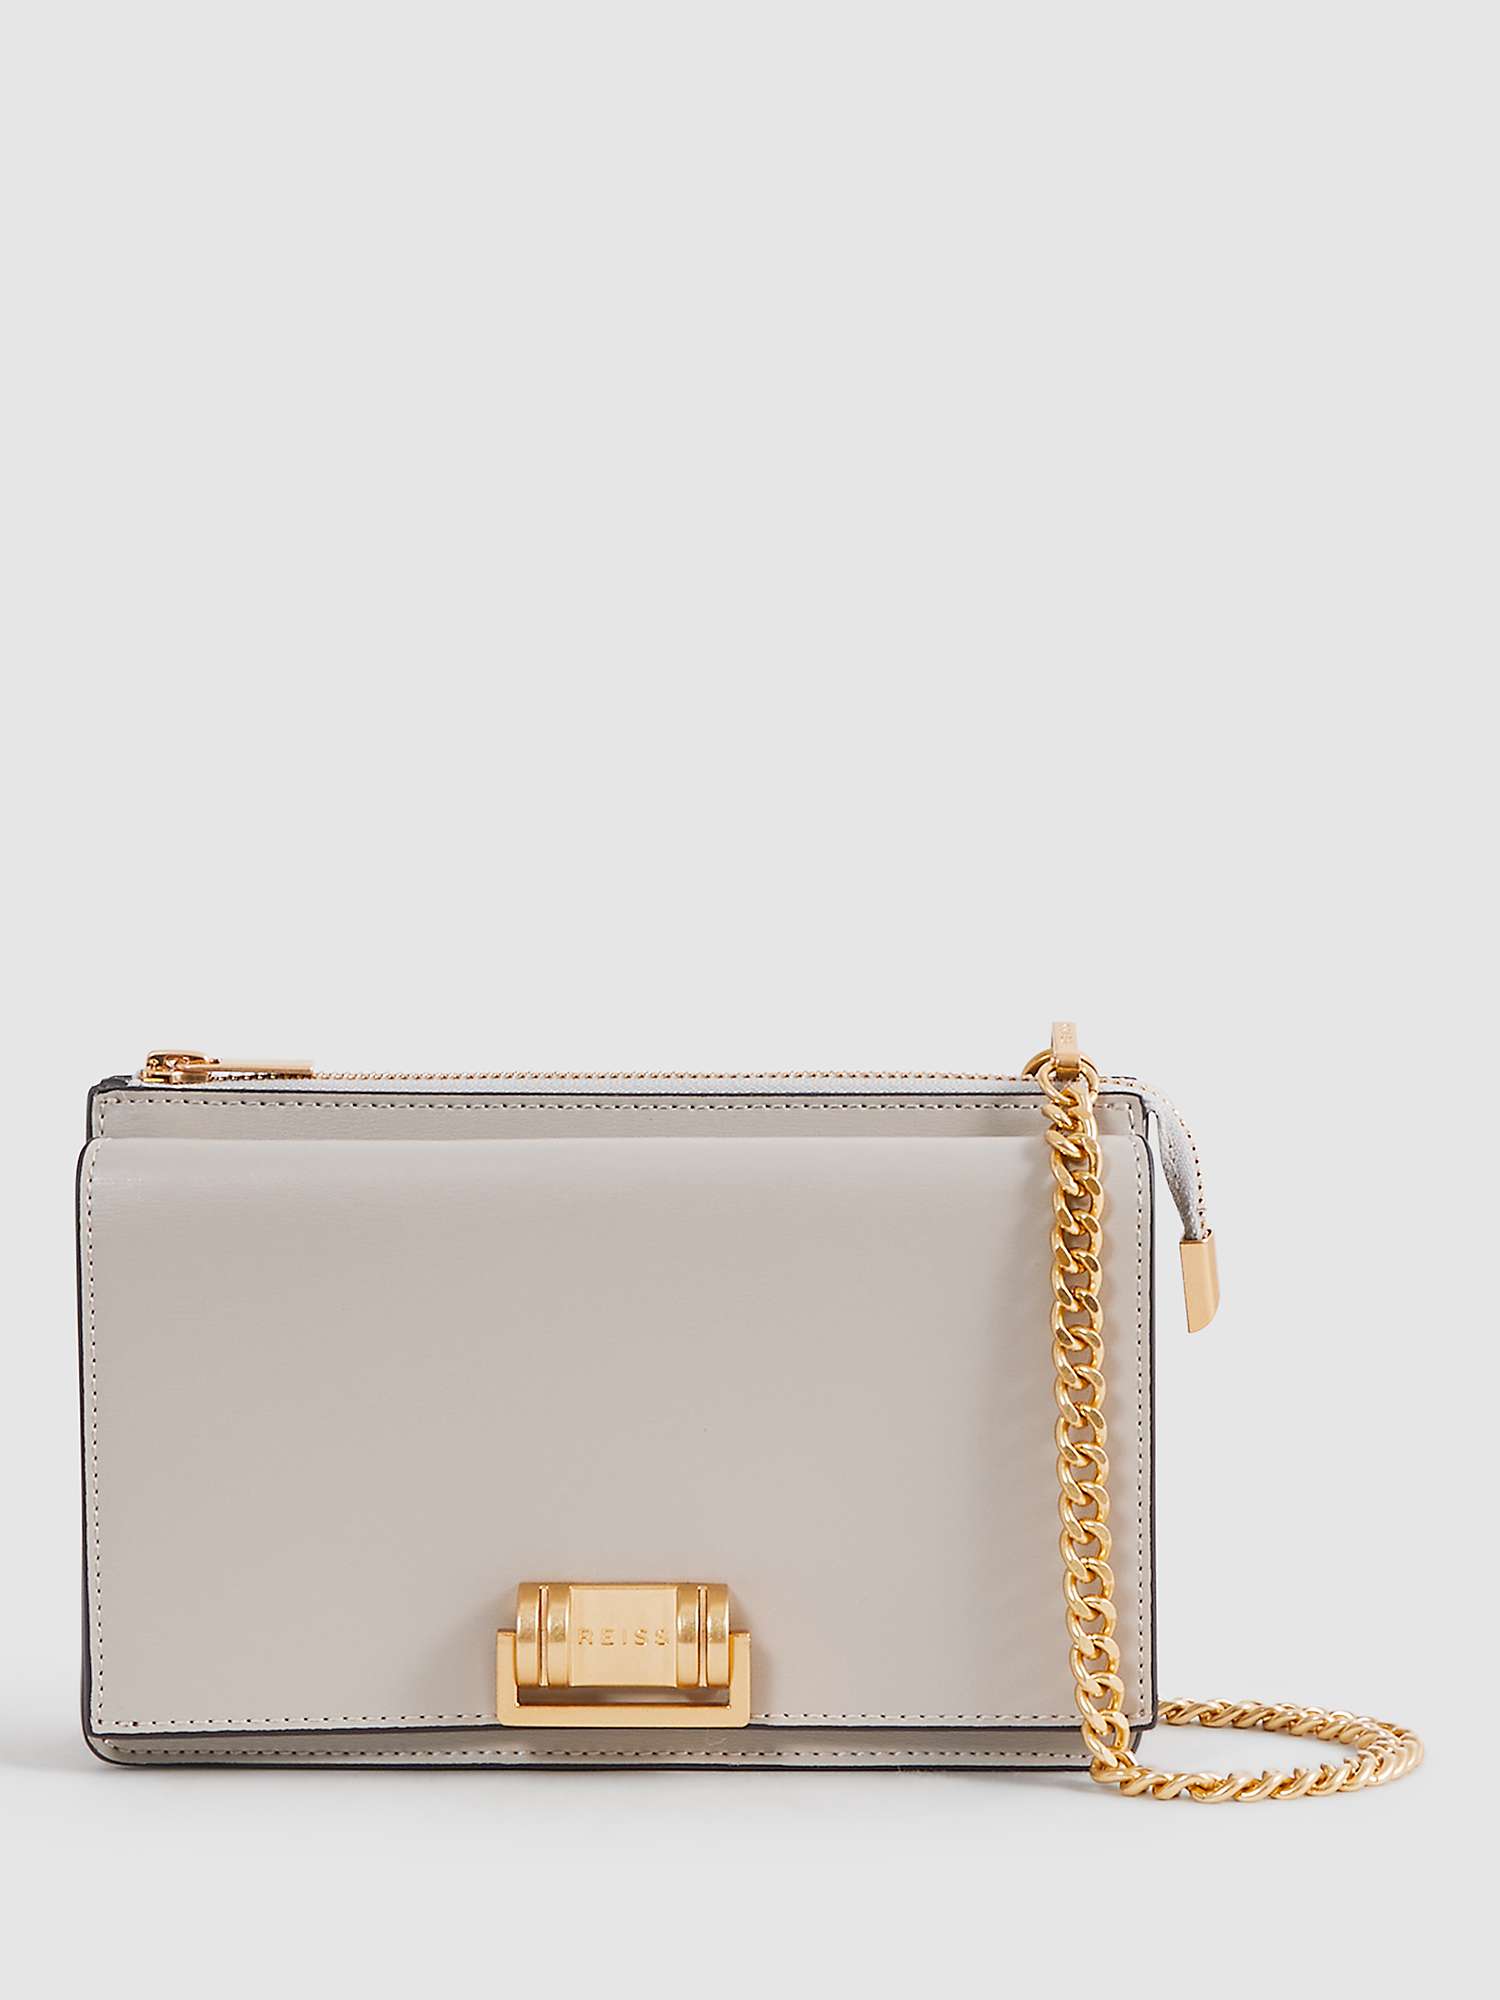 Buy Reiss Picton Chain Strap Leather Crossbody Bag Online at johnlewis.com